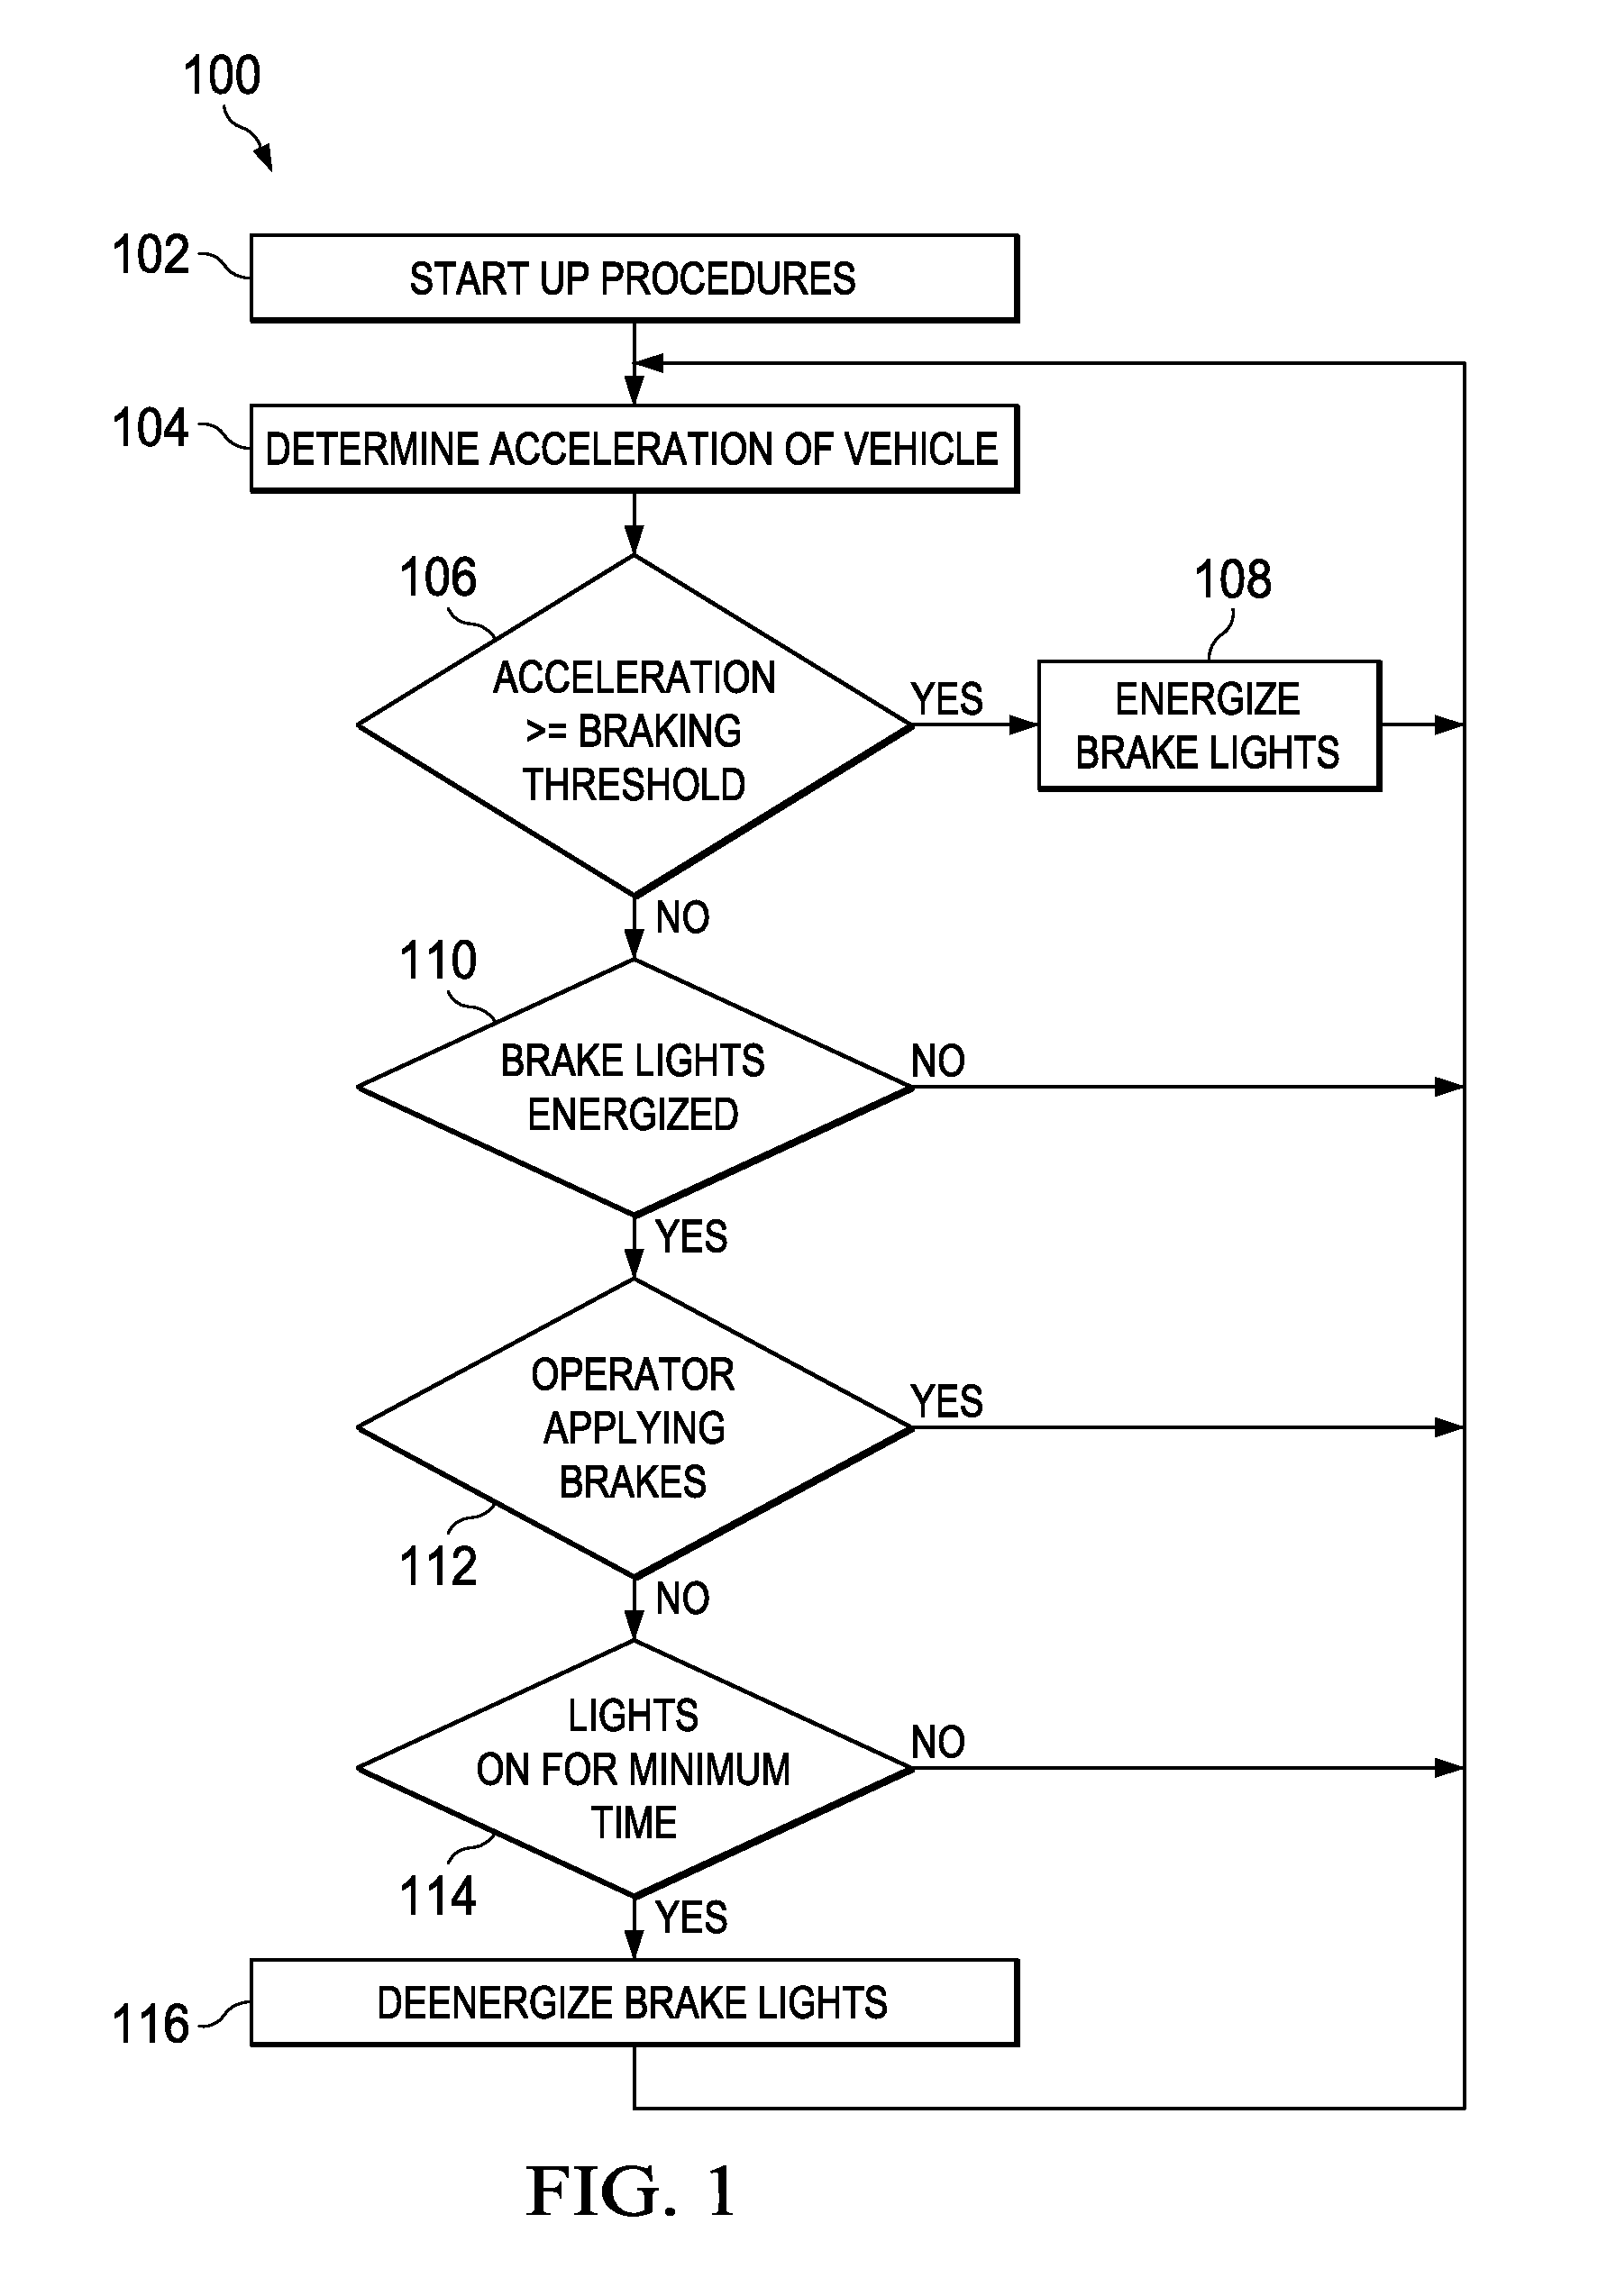 System, method and apparatus for energizing vehicle brake lights